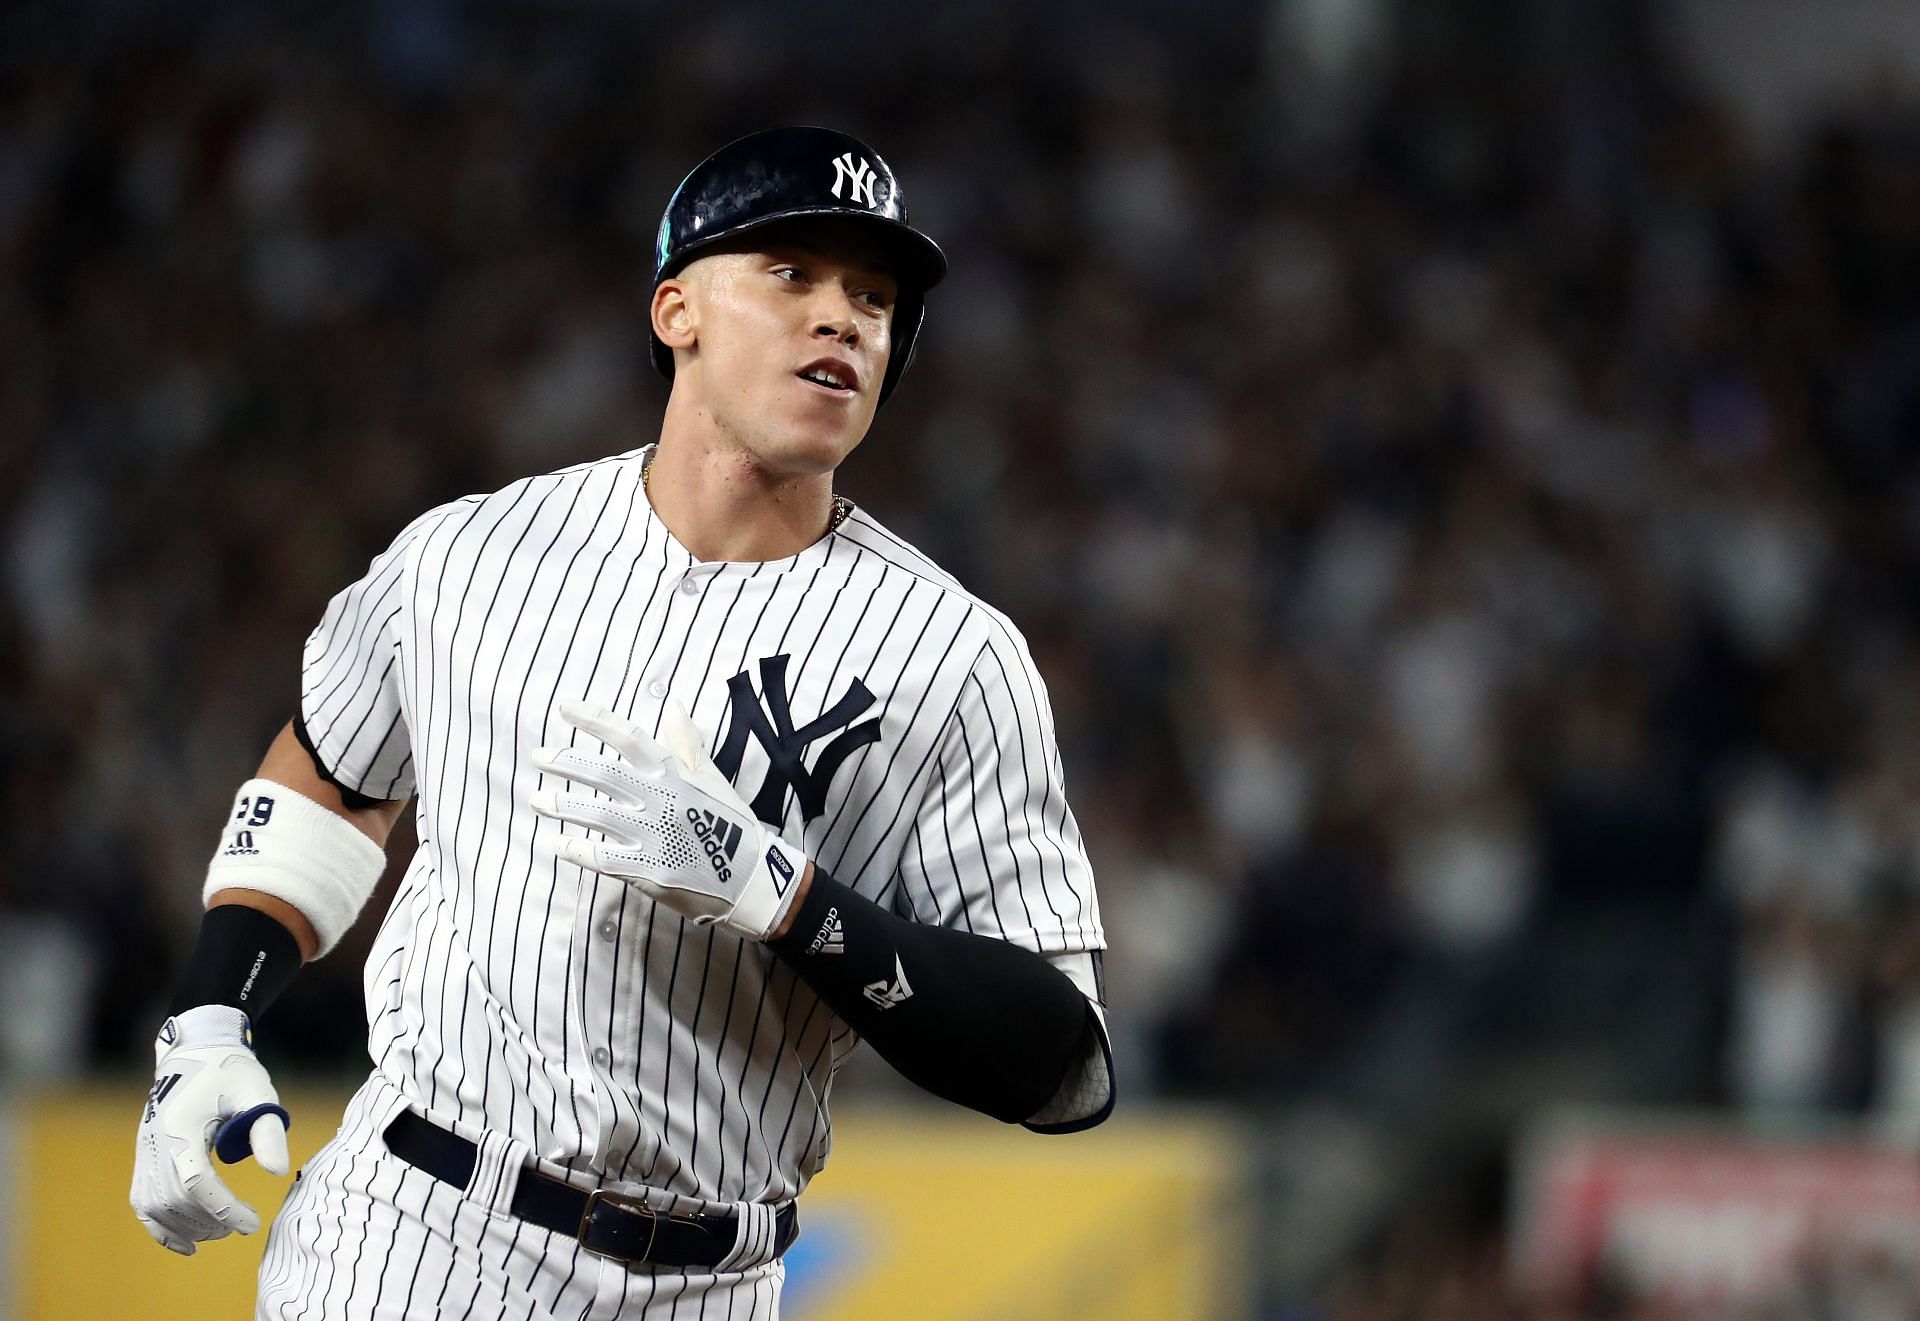 Can Aaron Judge bring back the Yankees to the promised land?